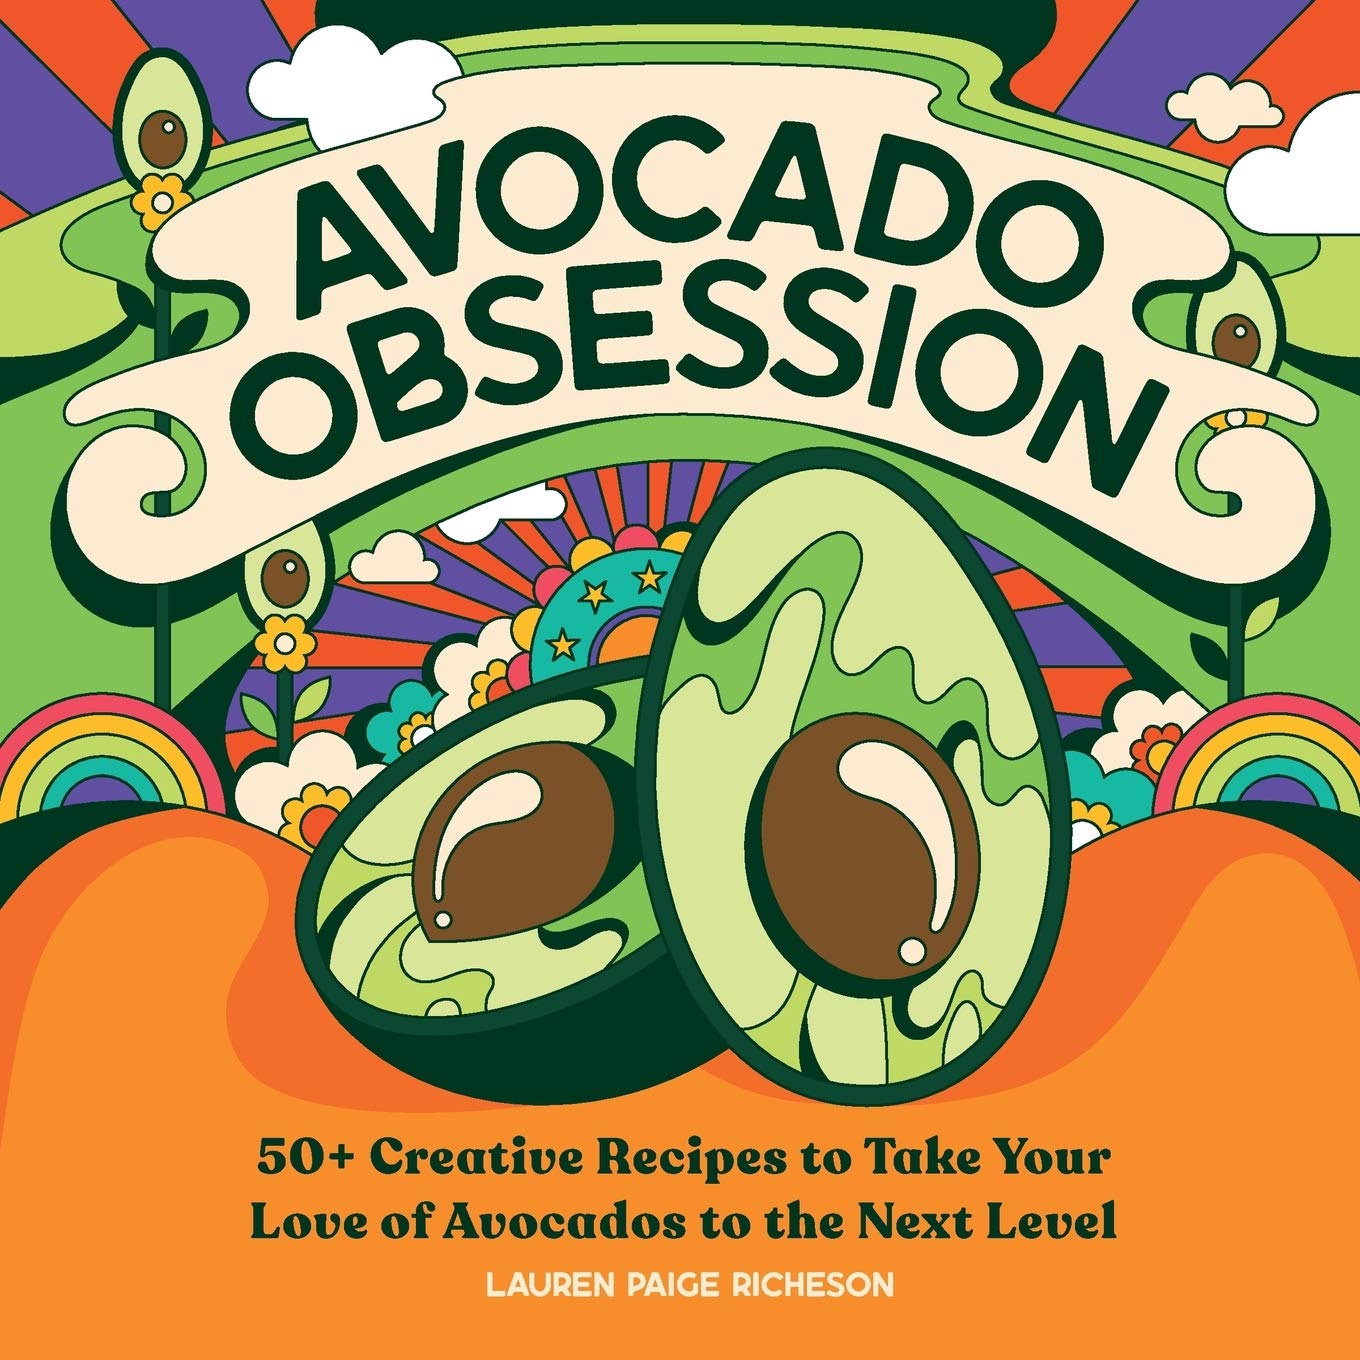 Avocado Obsession: 50+ Creative Recipes to Take Your Love of Avocados to the Next Level